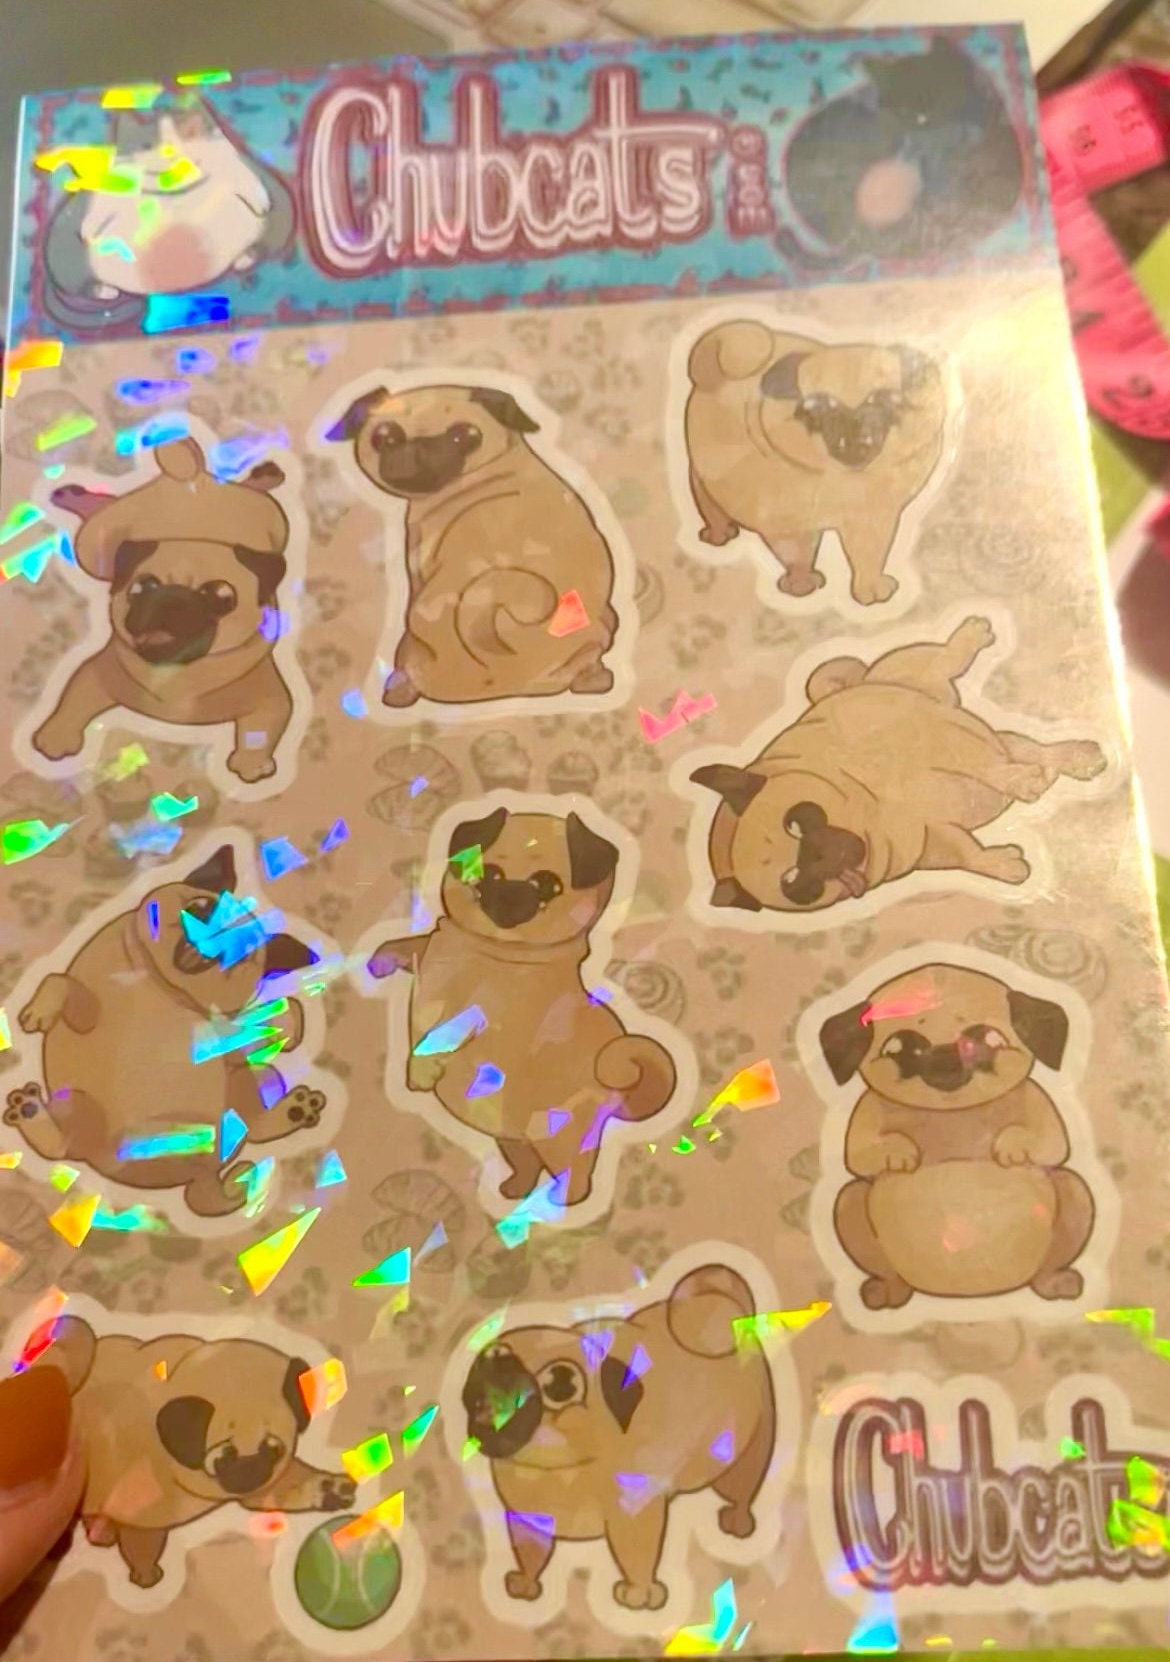 Chubcats and Friends - Chubby Pugs Holographic Sticker Sheet